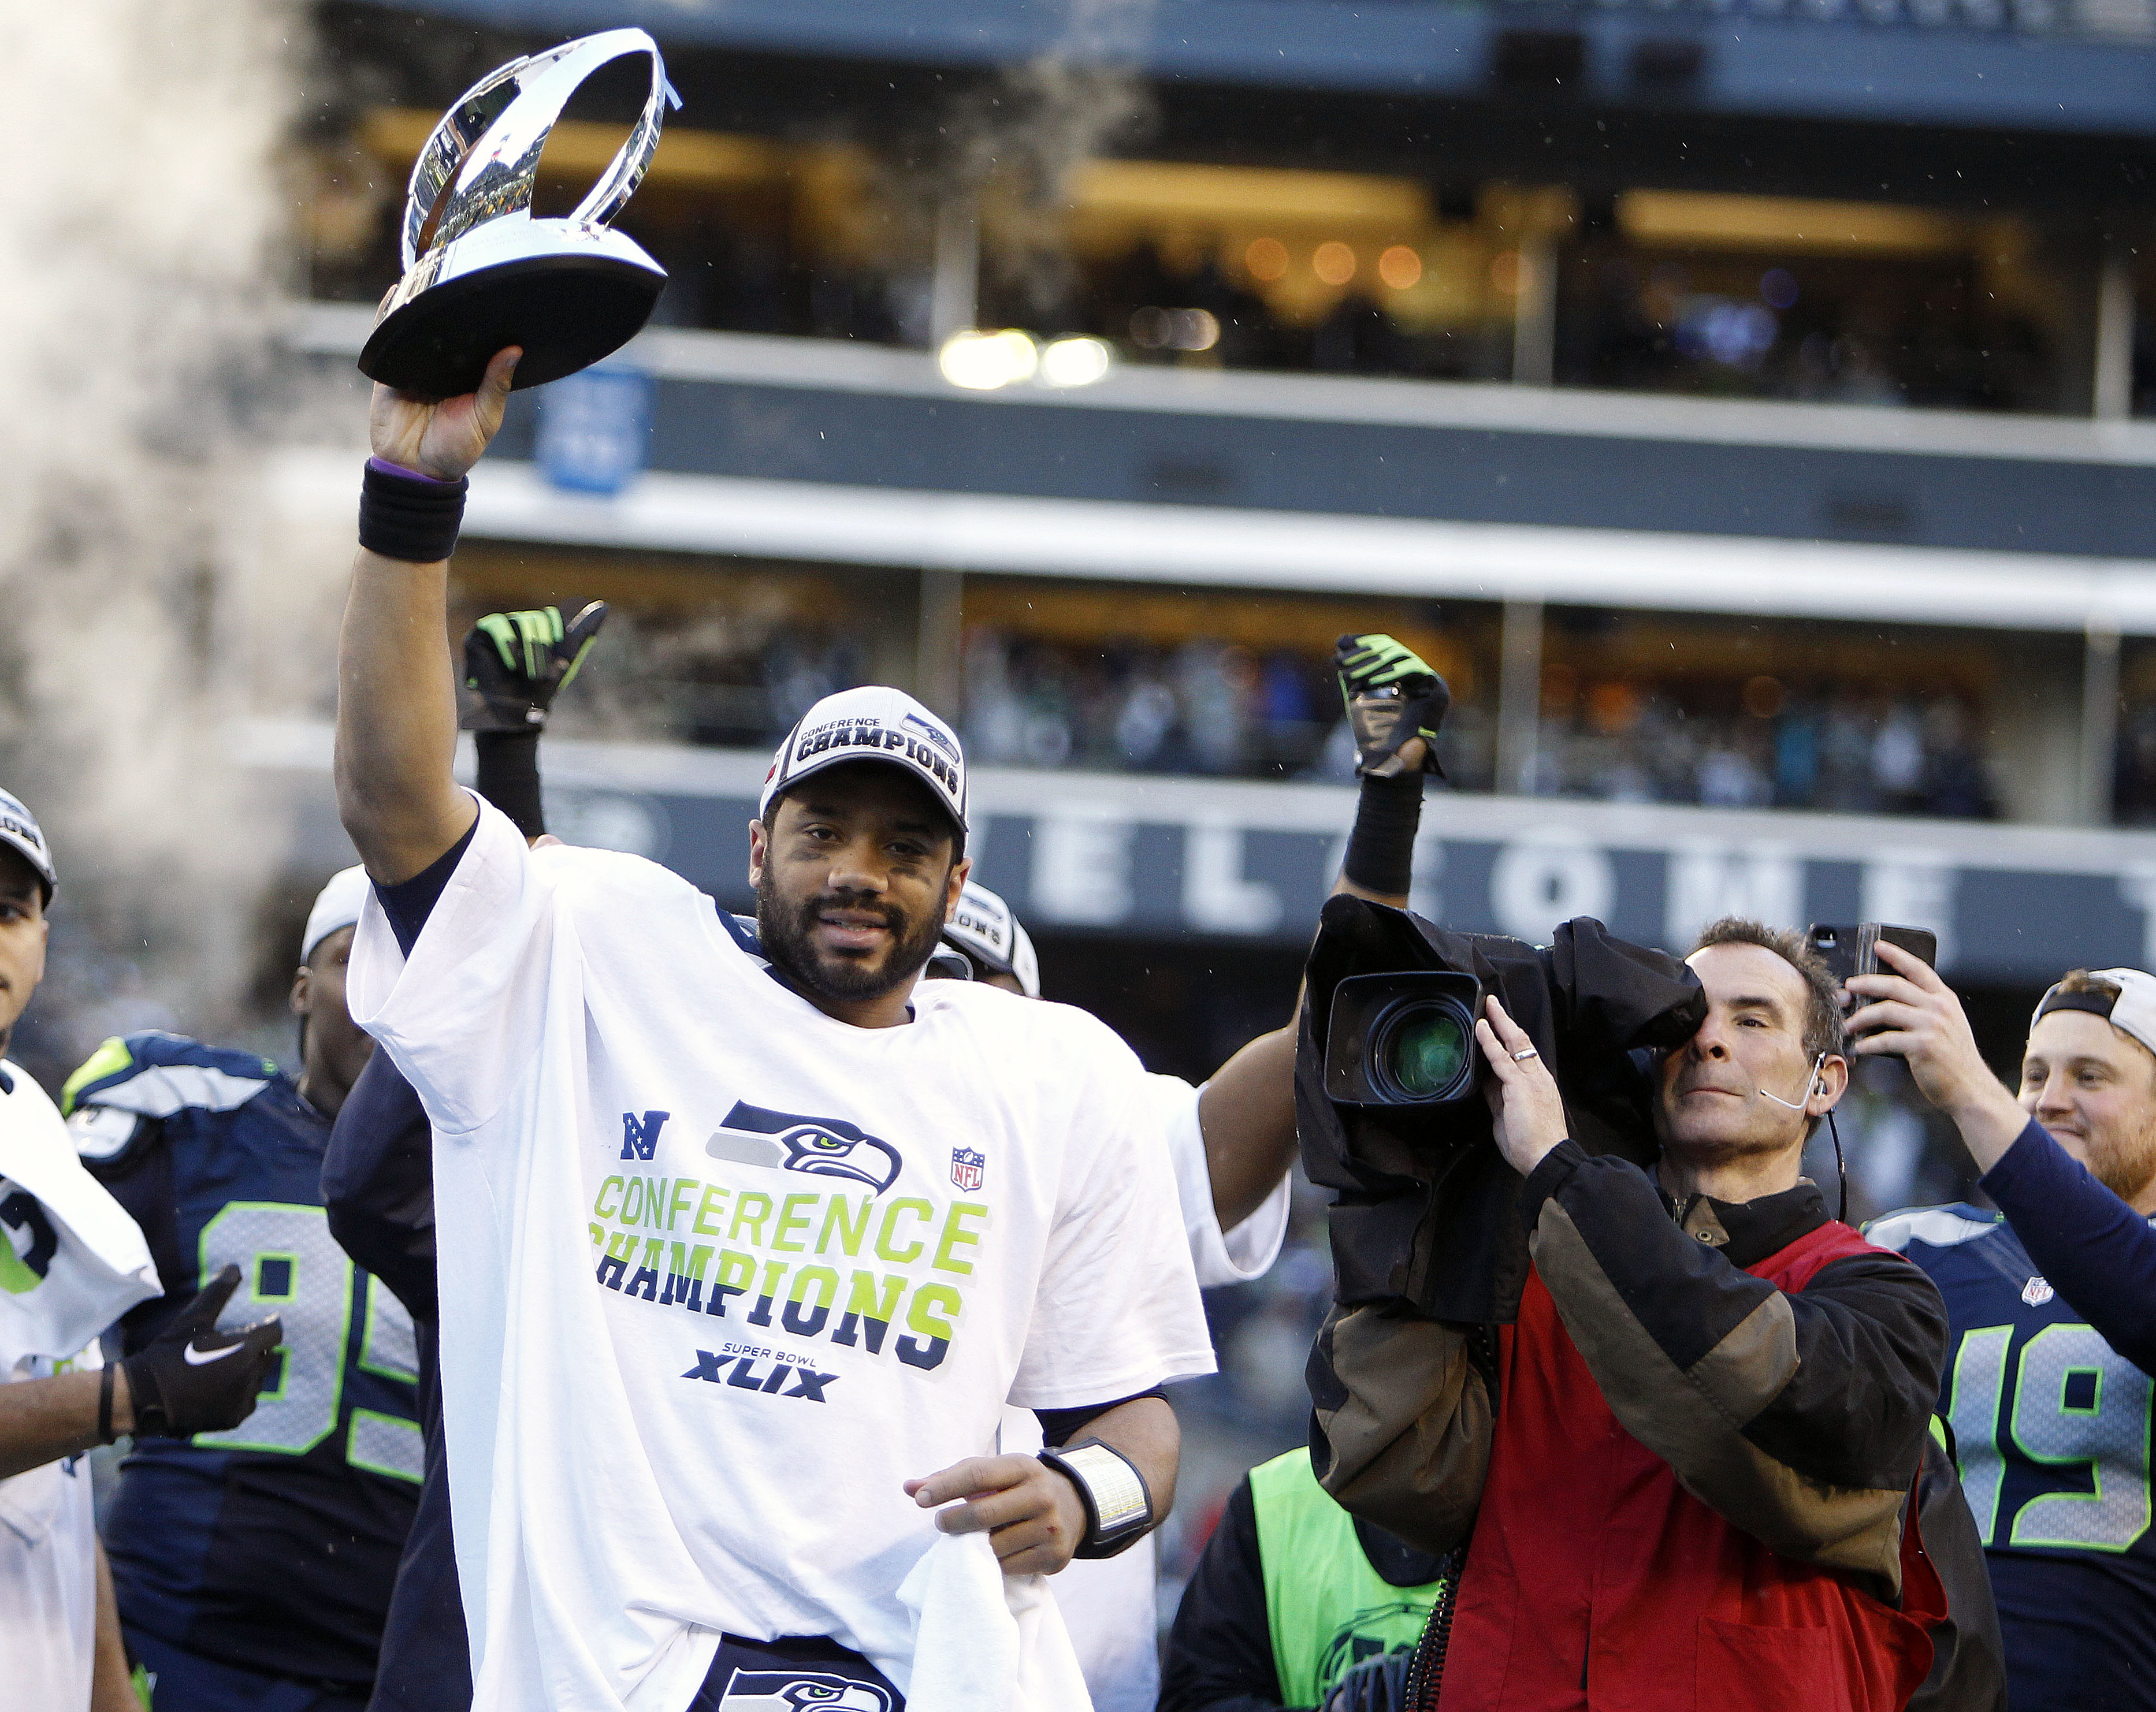 Seattle QB Russell Wilson celebrates the win. He completed 14-of-29 passes for 209 yards and was intercepted four times ... and yet this is the signature game of his young career. He was that good in the final minutes. (Joe Nicholson, USA TODAY Sports)